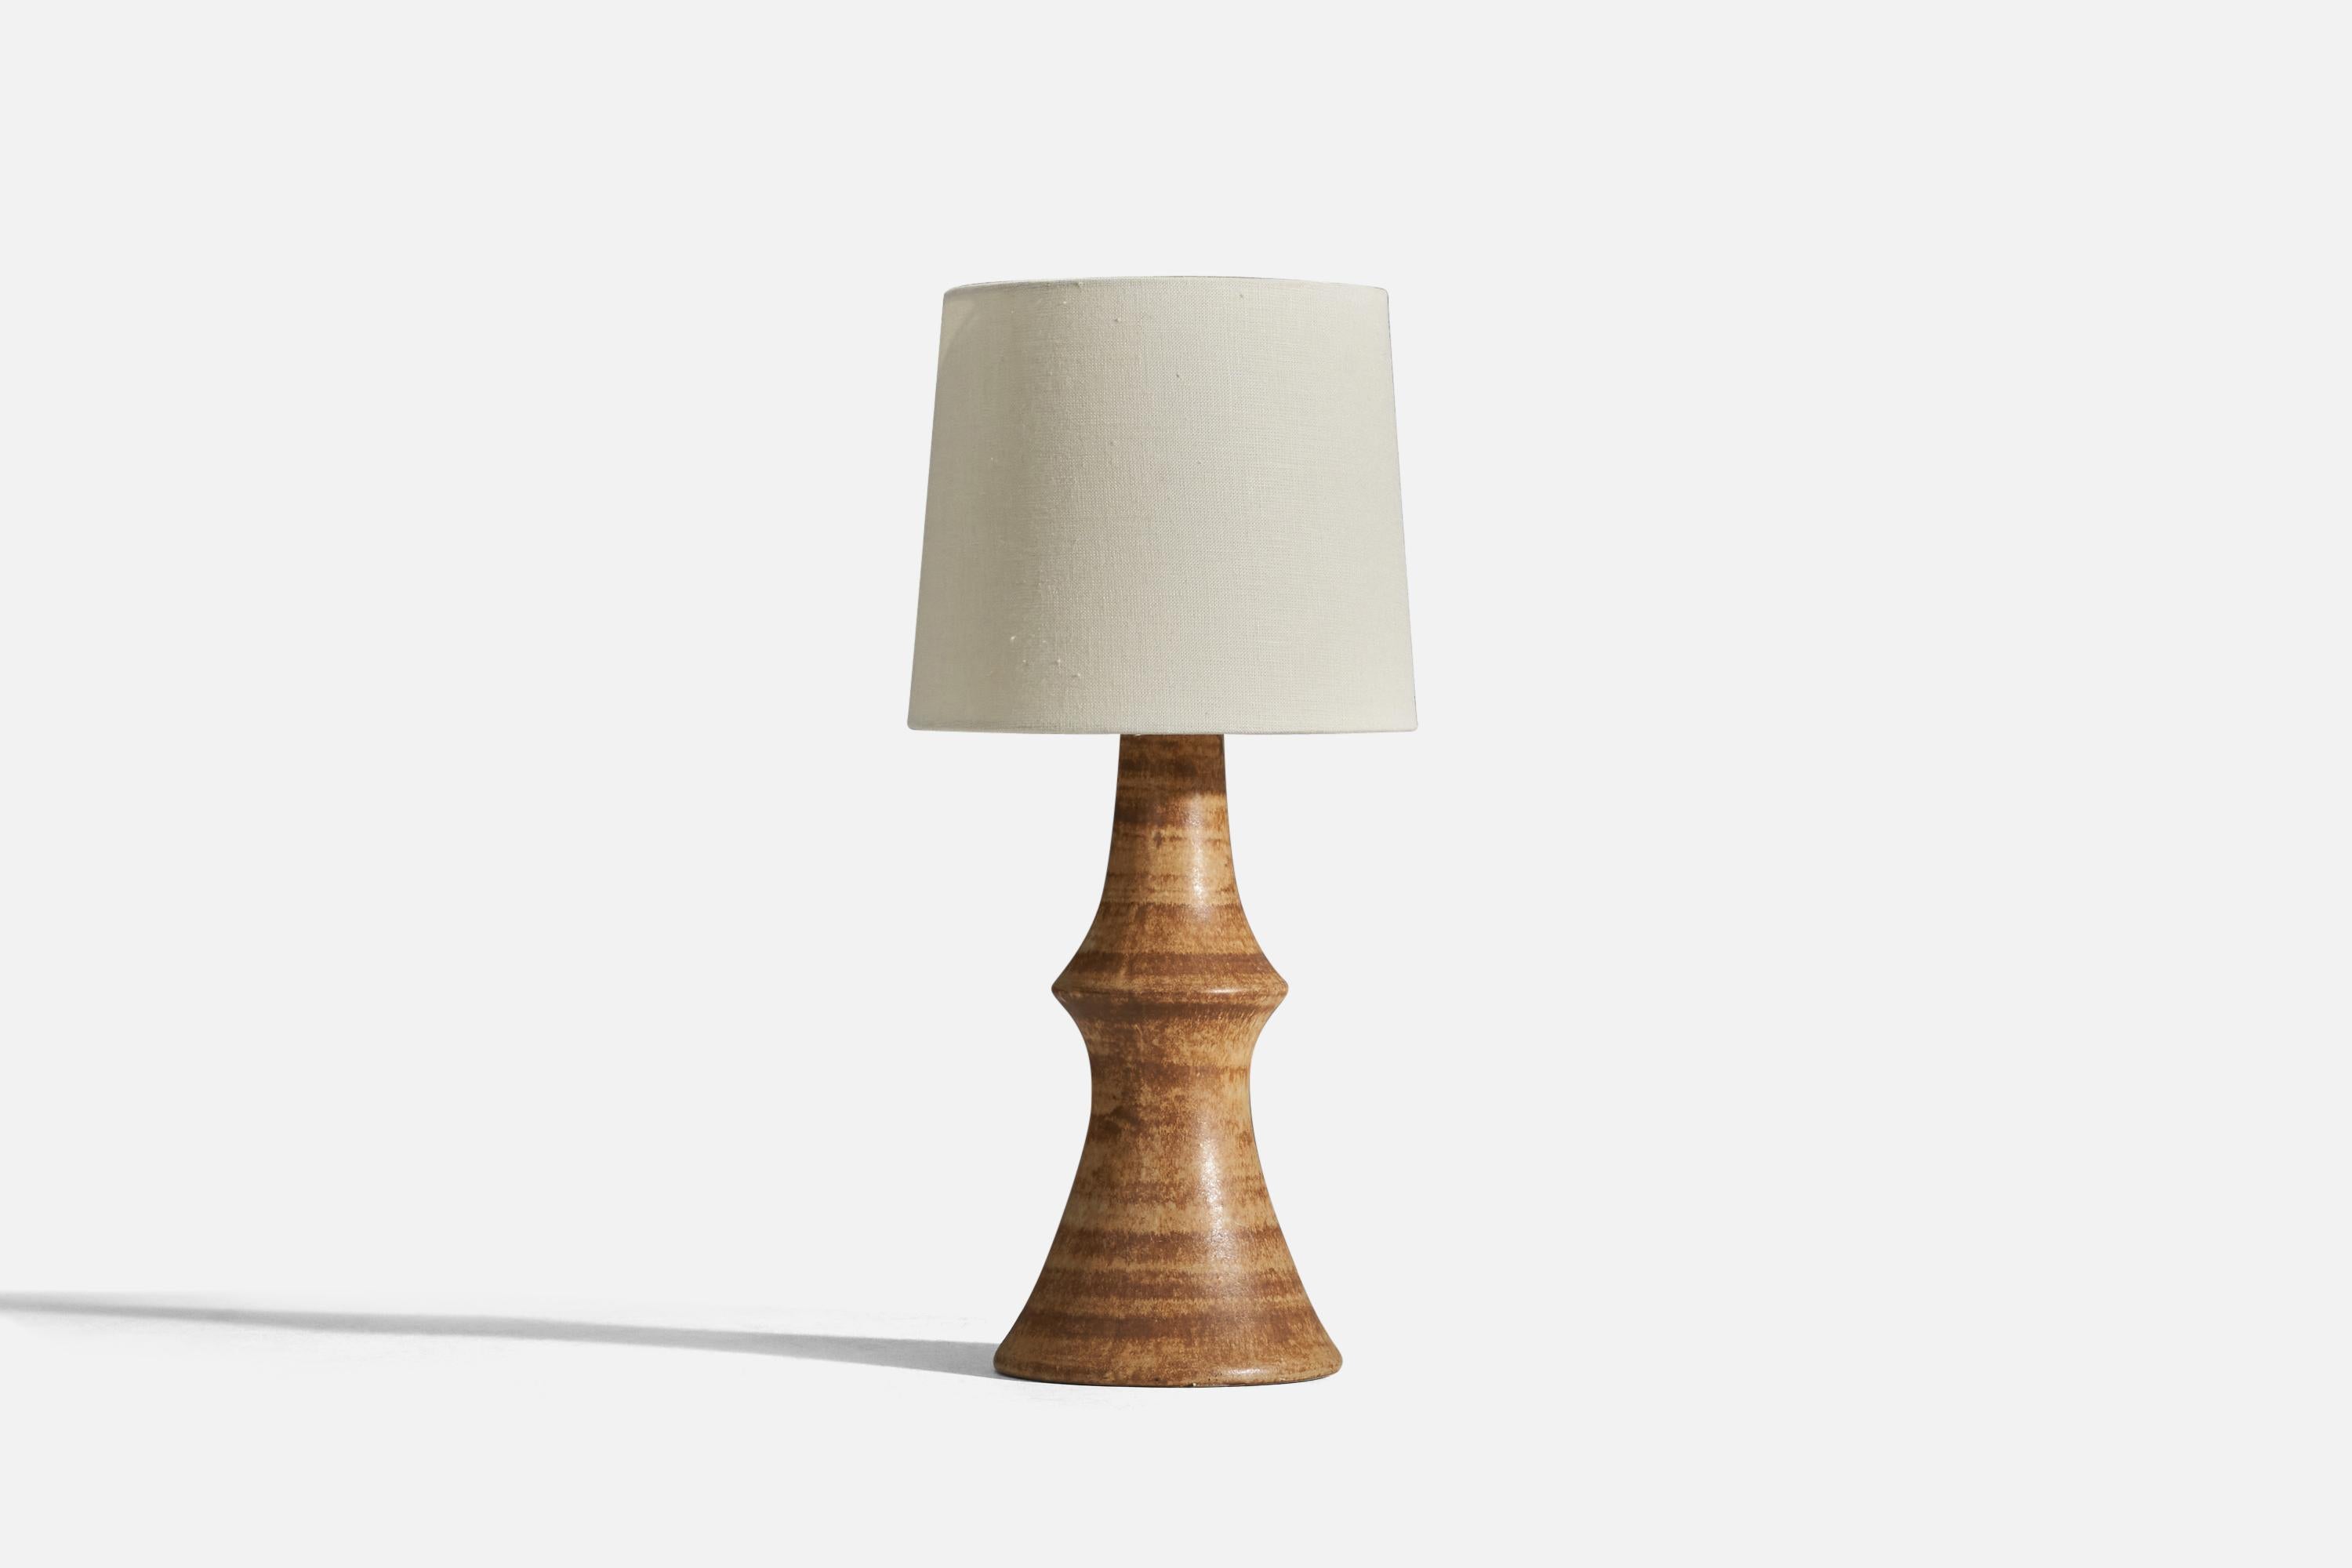 A brown glazed stoneware table lamp designed by Bruno Karlsson and produced by Studio Ego, Sweden, 1960s.

Sold without lampshade
Dimensions of lamp (inches) : 13.06 x 5.56 x 5.56 (Height x Width x Depth)
Dimensions of lampshade (inches) : 7 x 8